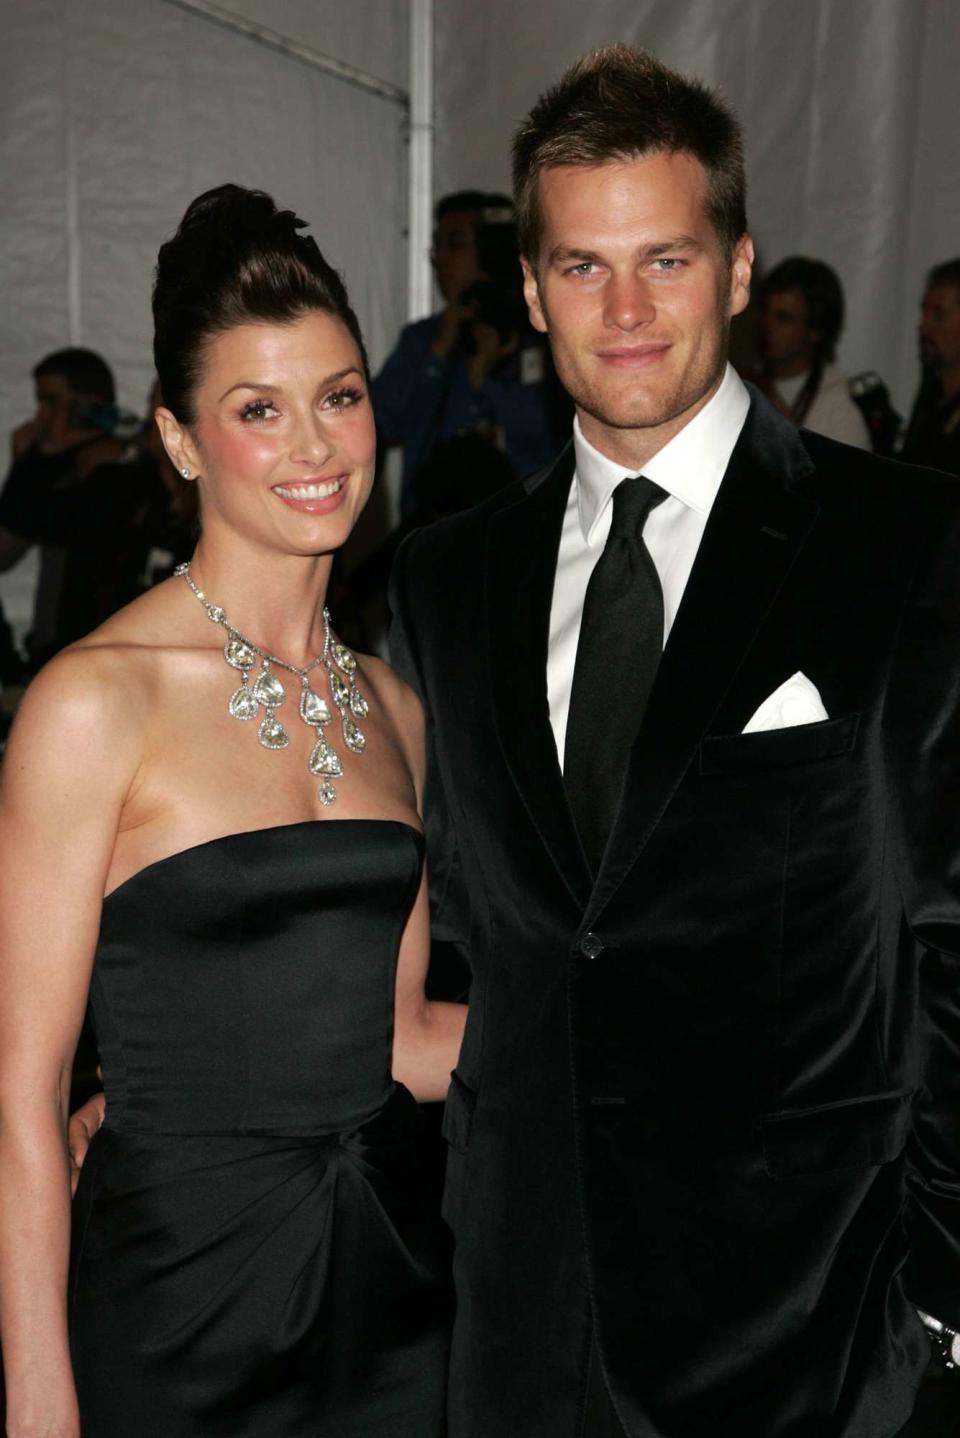 Bridget Moynahan and football player Tom Brady of the New England Patriots attend the Metropolitan Museum of Art Costume Institute Benefit Gala: Anglomania at the Metropolitan Museum of Art May 1, 2006 in New York City